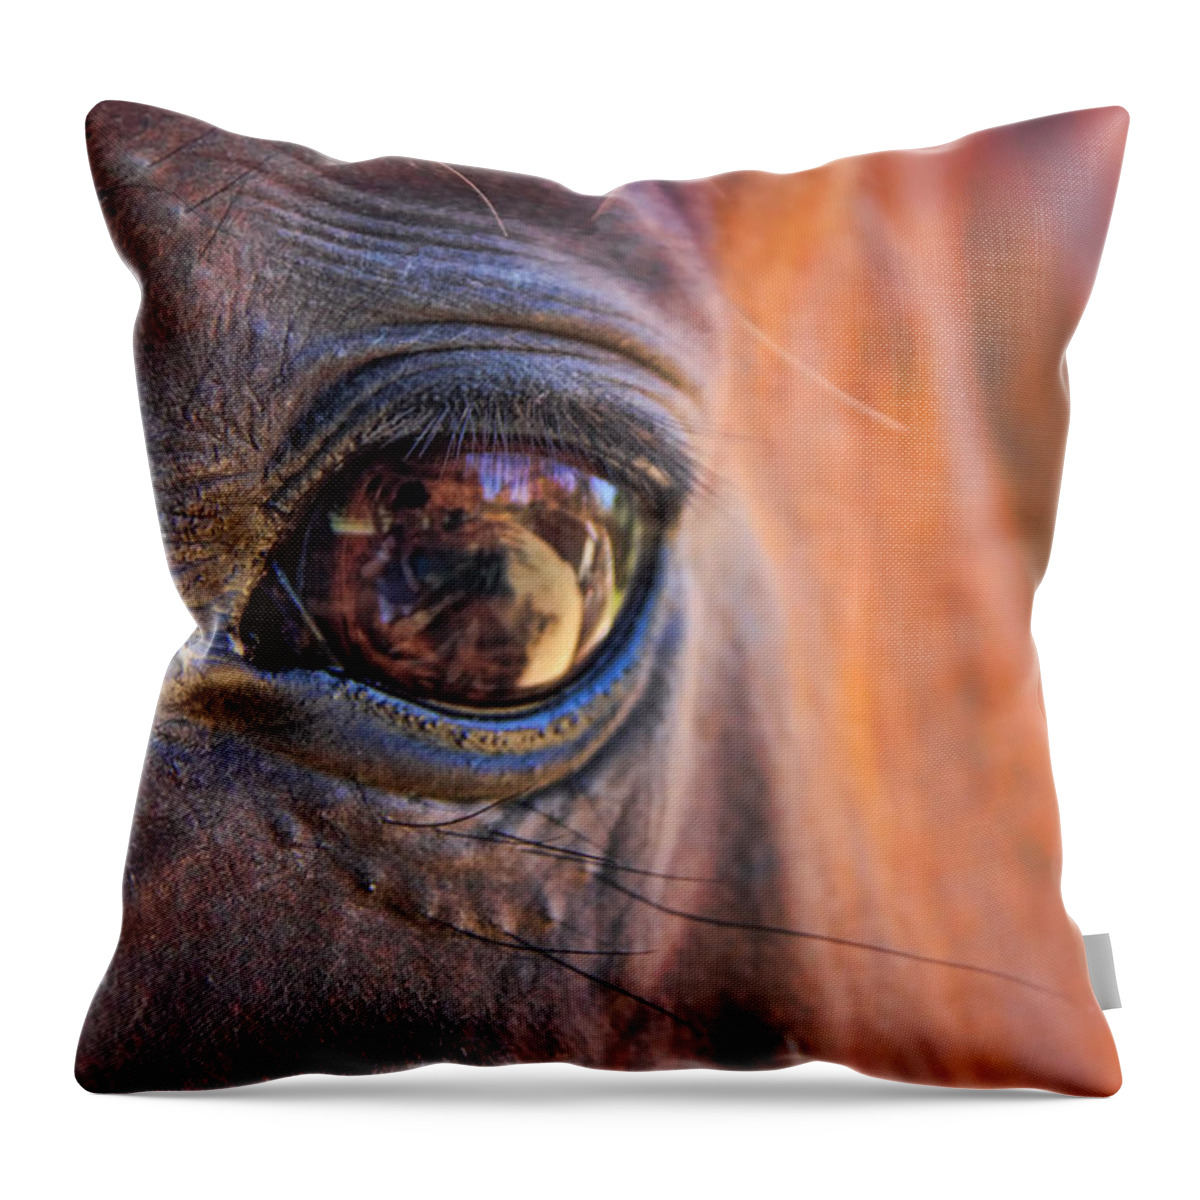 What Are You Looking At Throw Pillow featuring the photograph What are you looking at? by Mariola Bitner